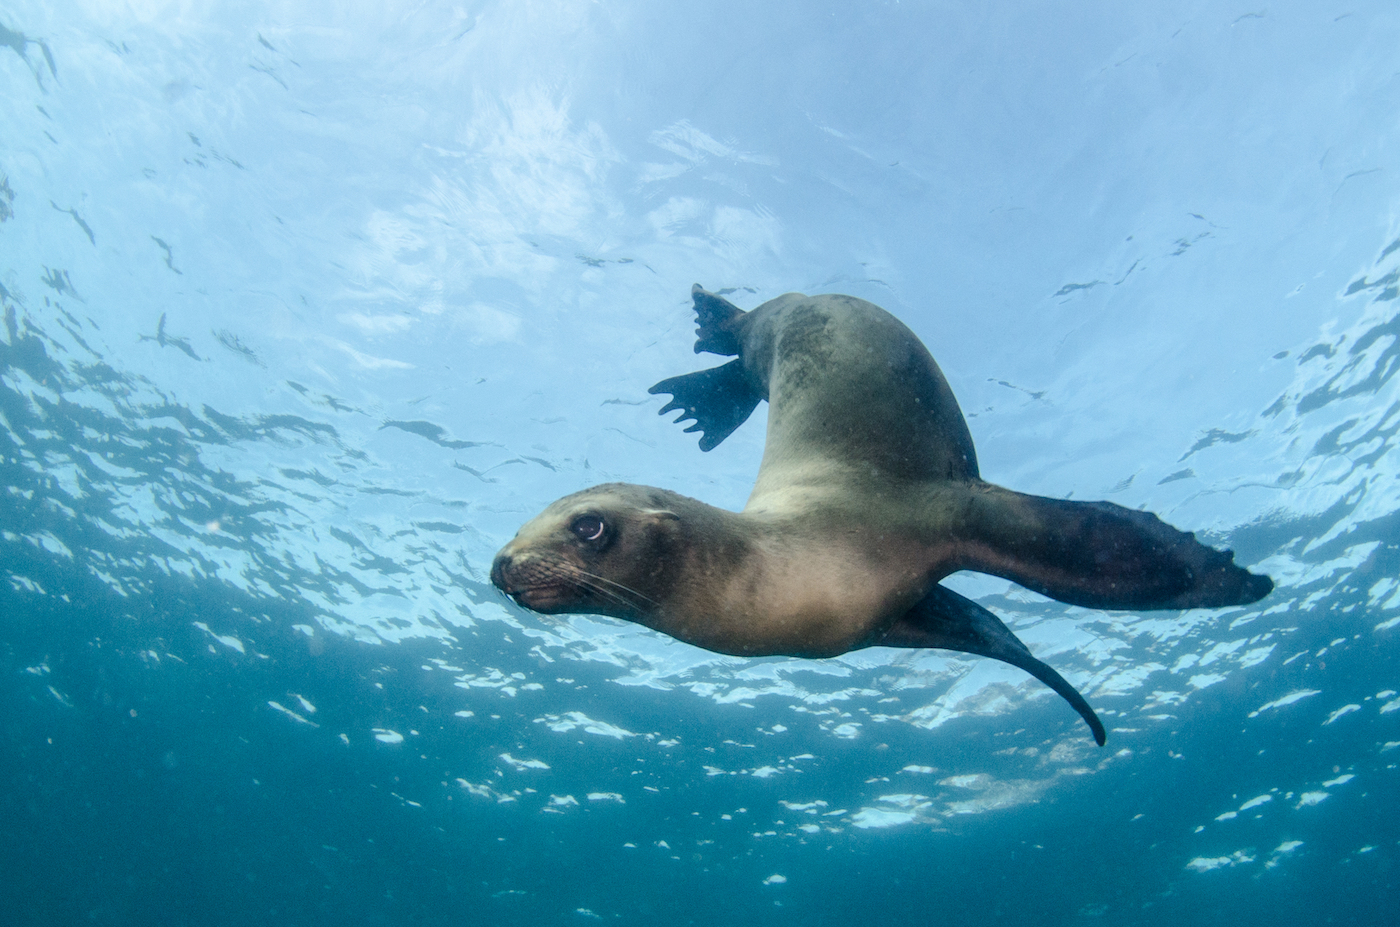 A sea lion swimming in open water, its back curved as it turns to swim in an opposite direction.